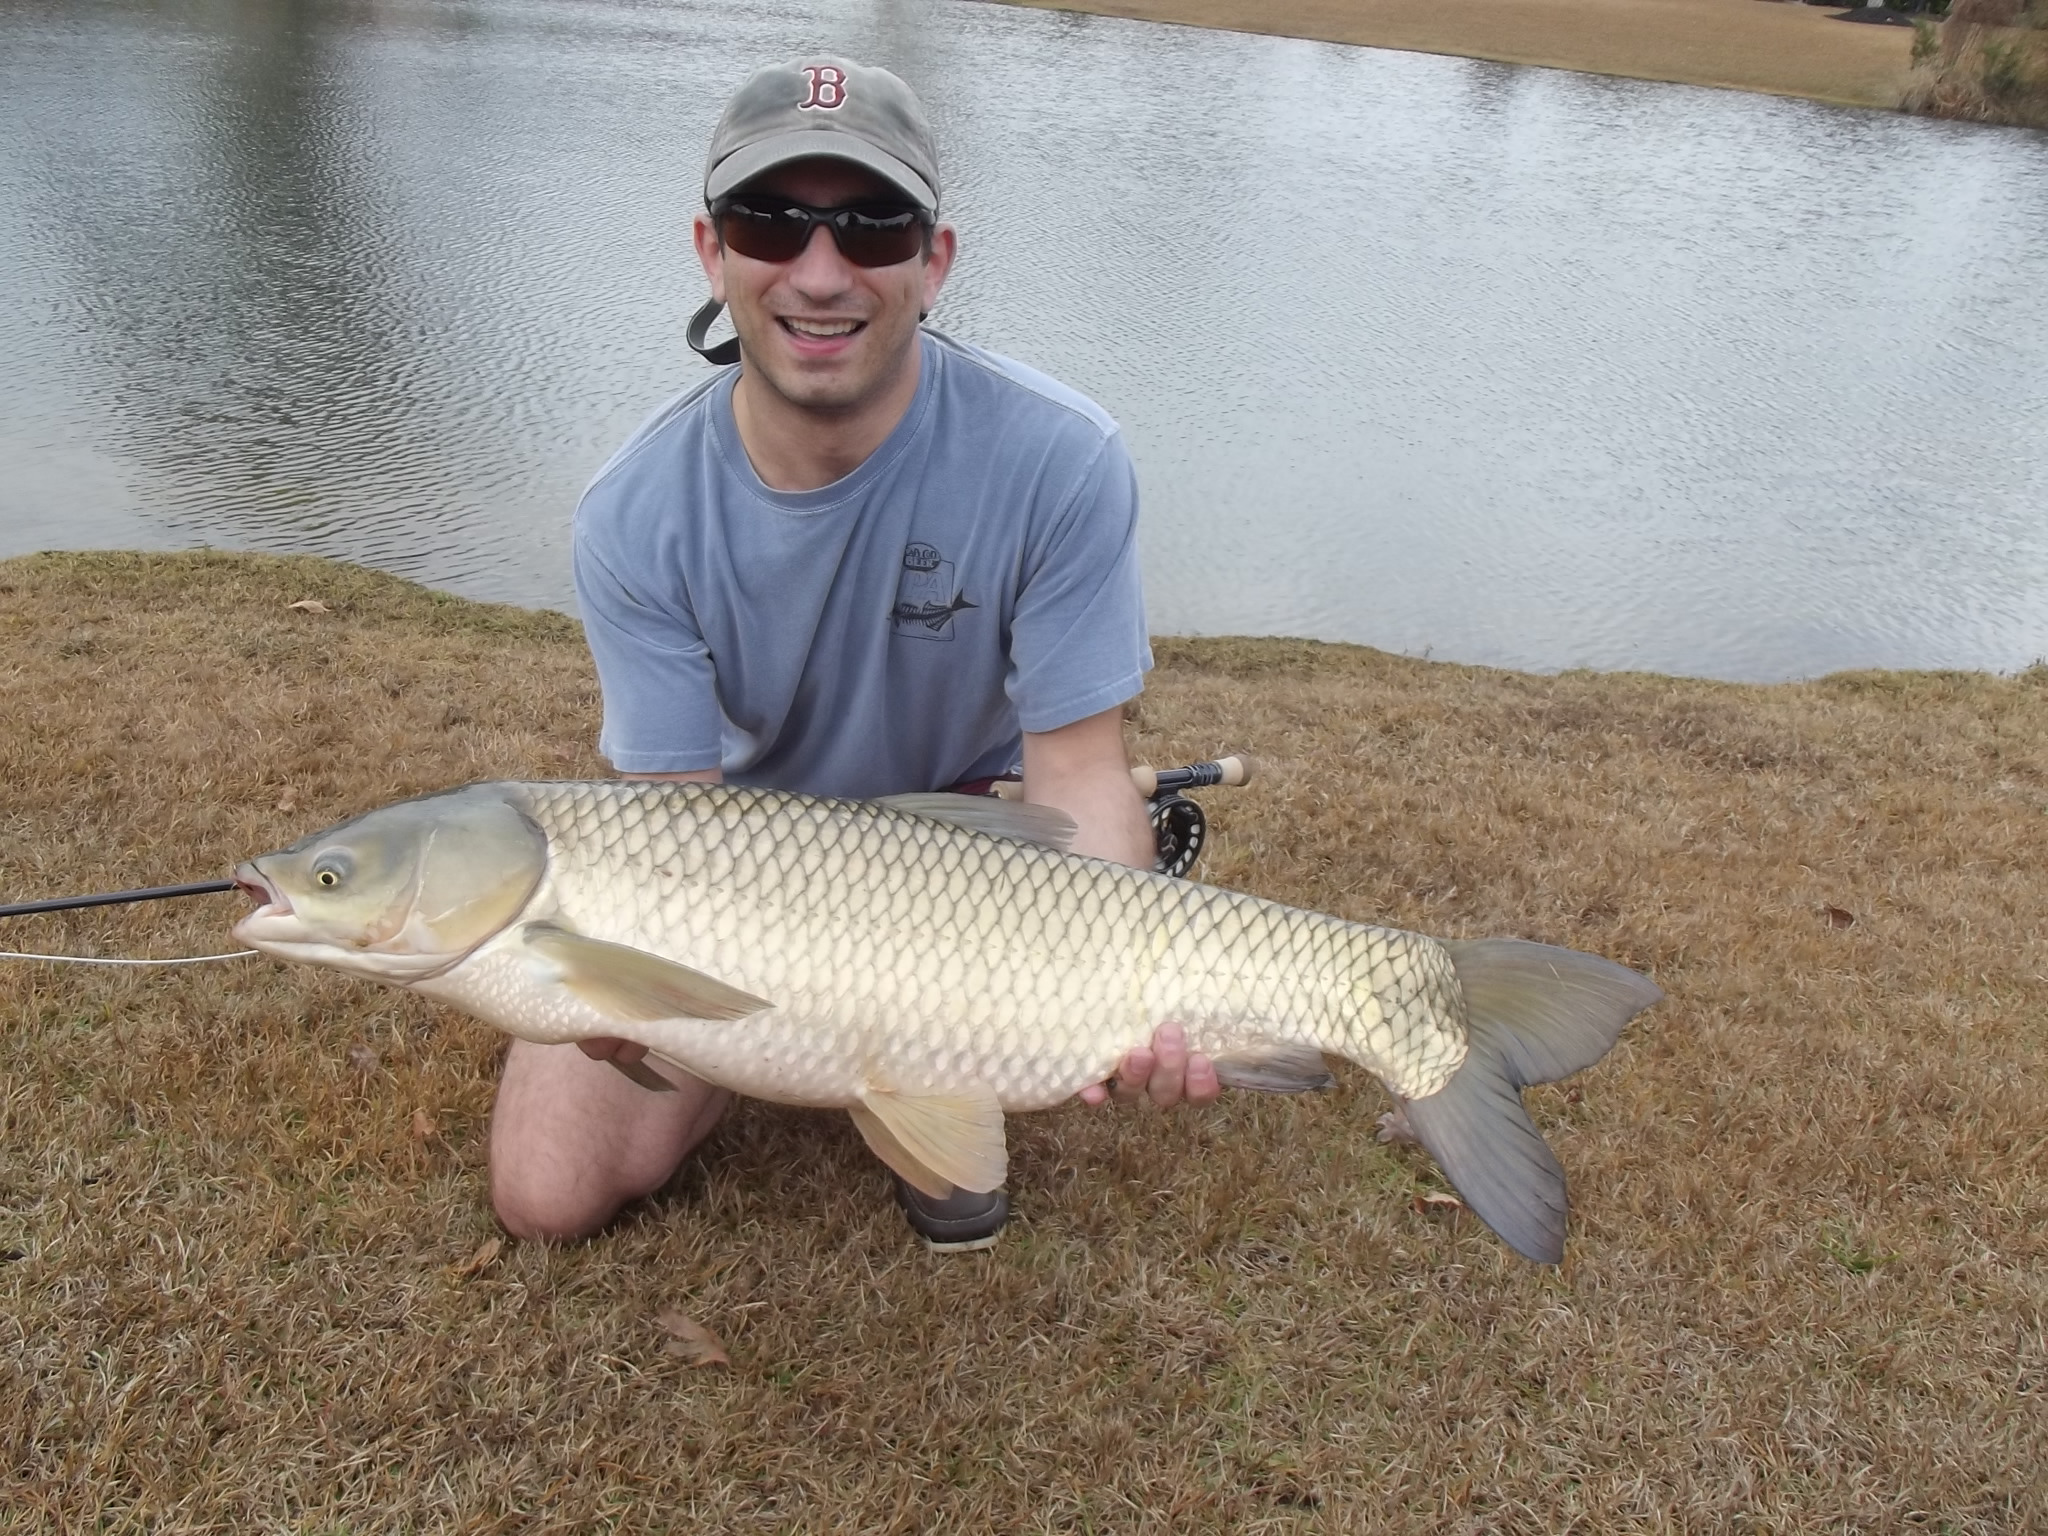 How To: Fly Fishing for Grass Carp - Find the Fishing